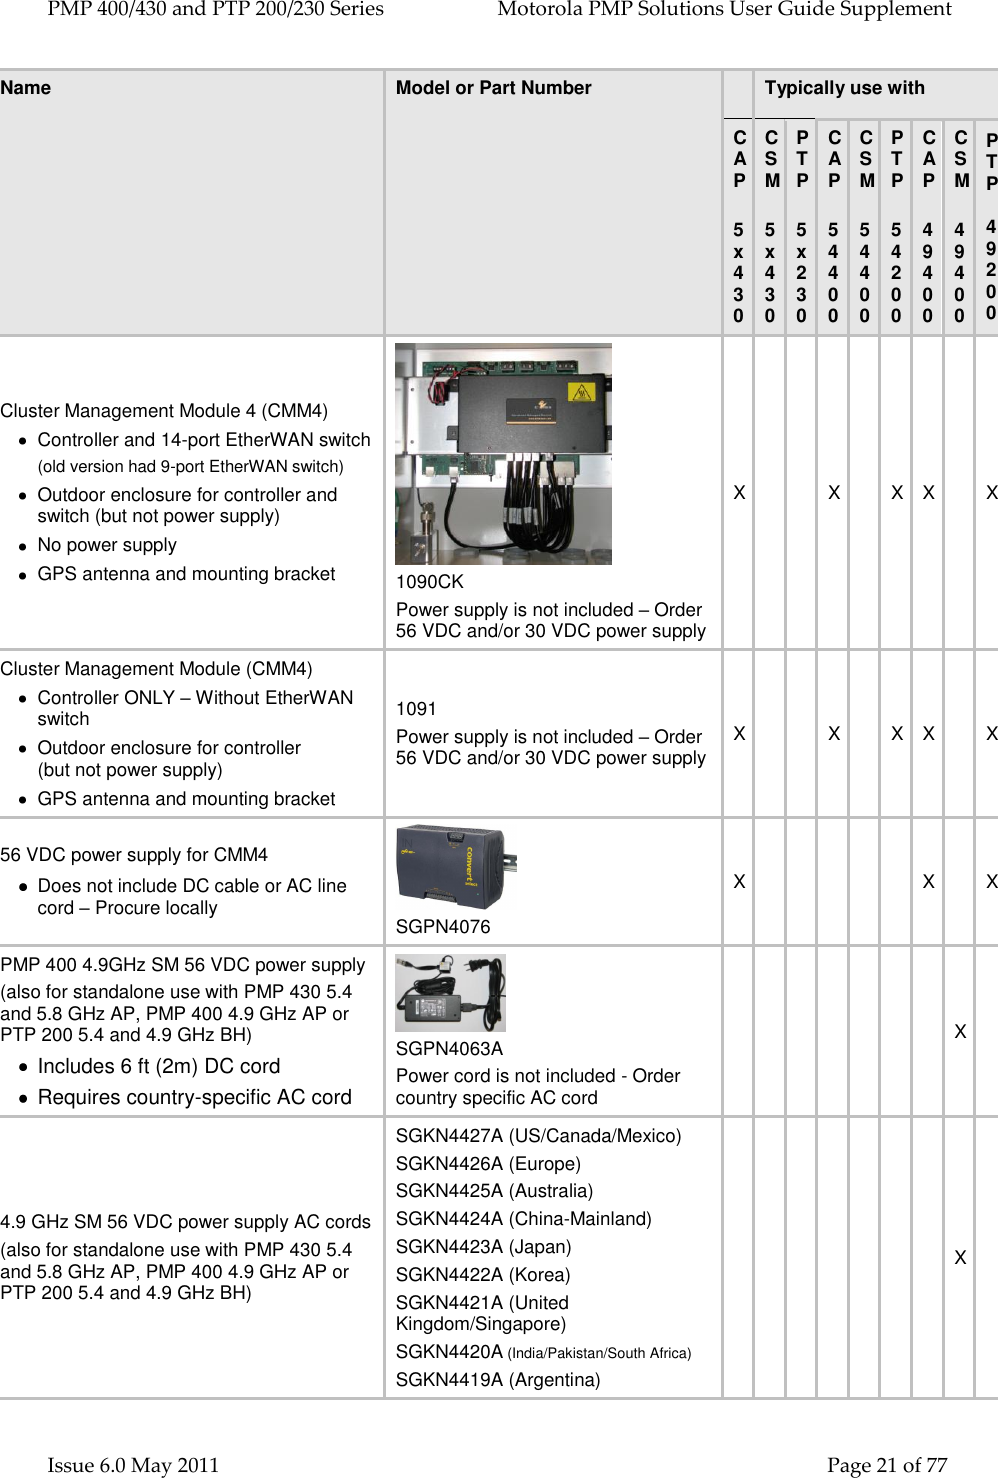 PMP 400/430 and PTP 200/230 Series   Motorola PMP Solutions User Guide Supplement Issue 6.0 May 2011    Page 21 of 77 Name Model or Part Number  Typically use with CAP  5x430 CSM      5x430 PTP      5x230 CAP  54400 CSM  54400 PTP  54200 CAP  49400 CSM  49400 PTP   49200 Cluster Management Module 4 (CMM4)   Controller and 14-port EtherWAN switch (old version had 9-port EtherWAN switch)   Outdoor enclosure for controller and switch (but not power supply)   No power supply   GPS antenna and mounting bracket   1090CK Power supply is not included – Order 56 VDC and/or 30 VDC power supply X   X  X X  X Cluster Management Module (CMM4)   Controller ONLY – Without EtherWAN switch   Outdoor enclosure for controller        (but not power supply)   GPS antenna and mounting bracket 1091 Power supply is not included – Order 56 VDC and/or 30 VDC power supply X   X  X X  X 56 VDC power supply for CMM4  Does not include DC cable or AC line cord – Procure locally  SGPN4076 X      X  X PMP 400 4.9GHz SM 56 VDC power supply  (also for standalone use with PMP 430 5.4 and 5.8 GHz AP, PMP 400 4.9 GHz AP or PTP 200 5.4 and 4.9 GHz BH)    Includes 6 ft (2m) DC cord   Requires country-specific AC cord  SGPN4063A Power cord is not included - Order country specific AC cord        X  4.9 GHz SM 56 VDC power supply AC cords  (also for standalone use with PMP 430 5.4 and 5.8 GHz AP, PMP 400 4.9 GHz AP or PTP 200 5.4 and 4.9 GHz BH)  SGKN4427A (US/Canada/Mexico) SGKN4426A (Europe) SGKN4425A (Australia) SGKN4424A (China-Mainland) SGKN4423A (Japan) SGKN4422A (Korea) SGKN4421A (United Kingdom/Singapore) SGKN4420A (India/Pakistan/South Africa) SGKN4419A (Argentina)        X  